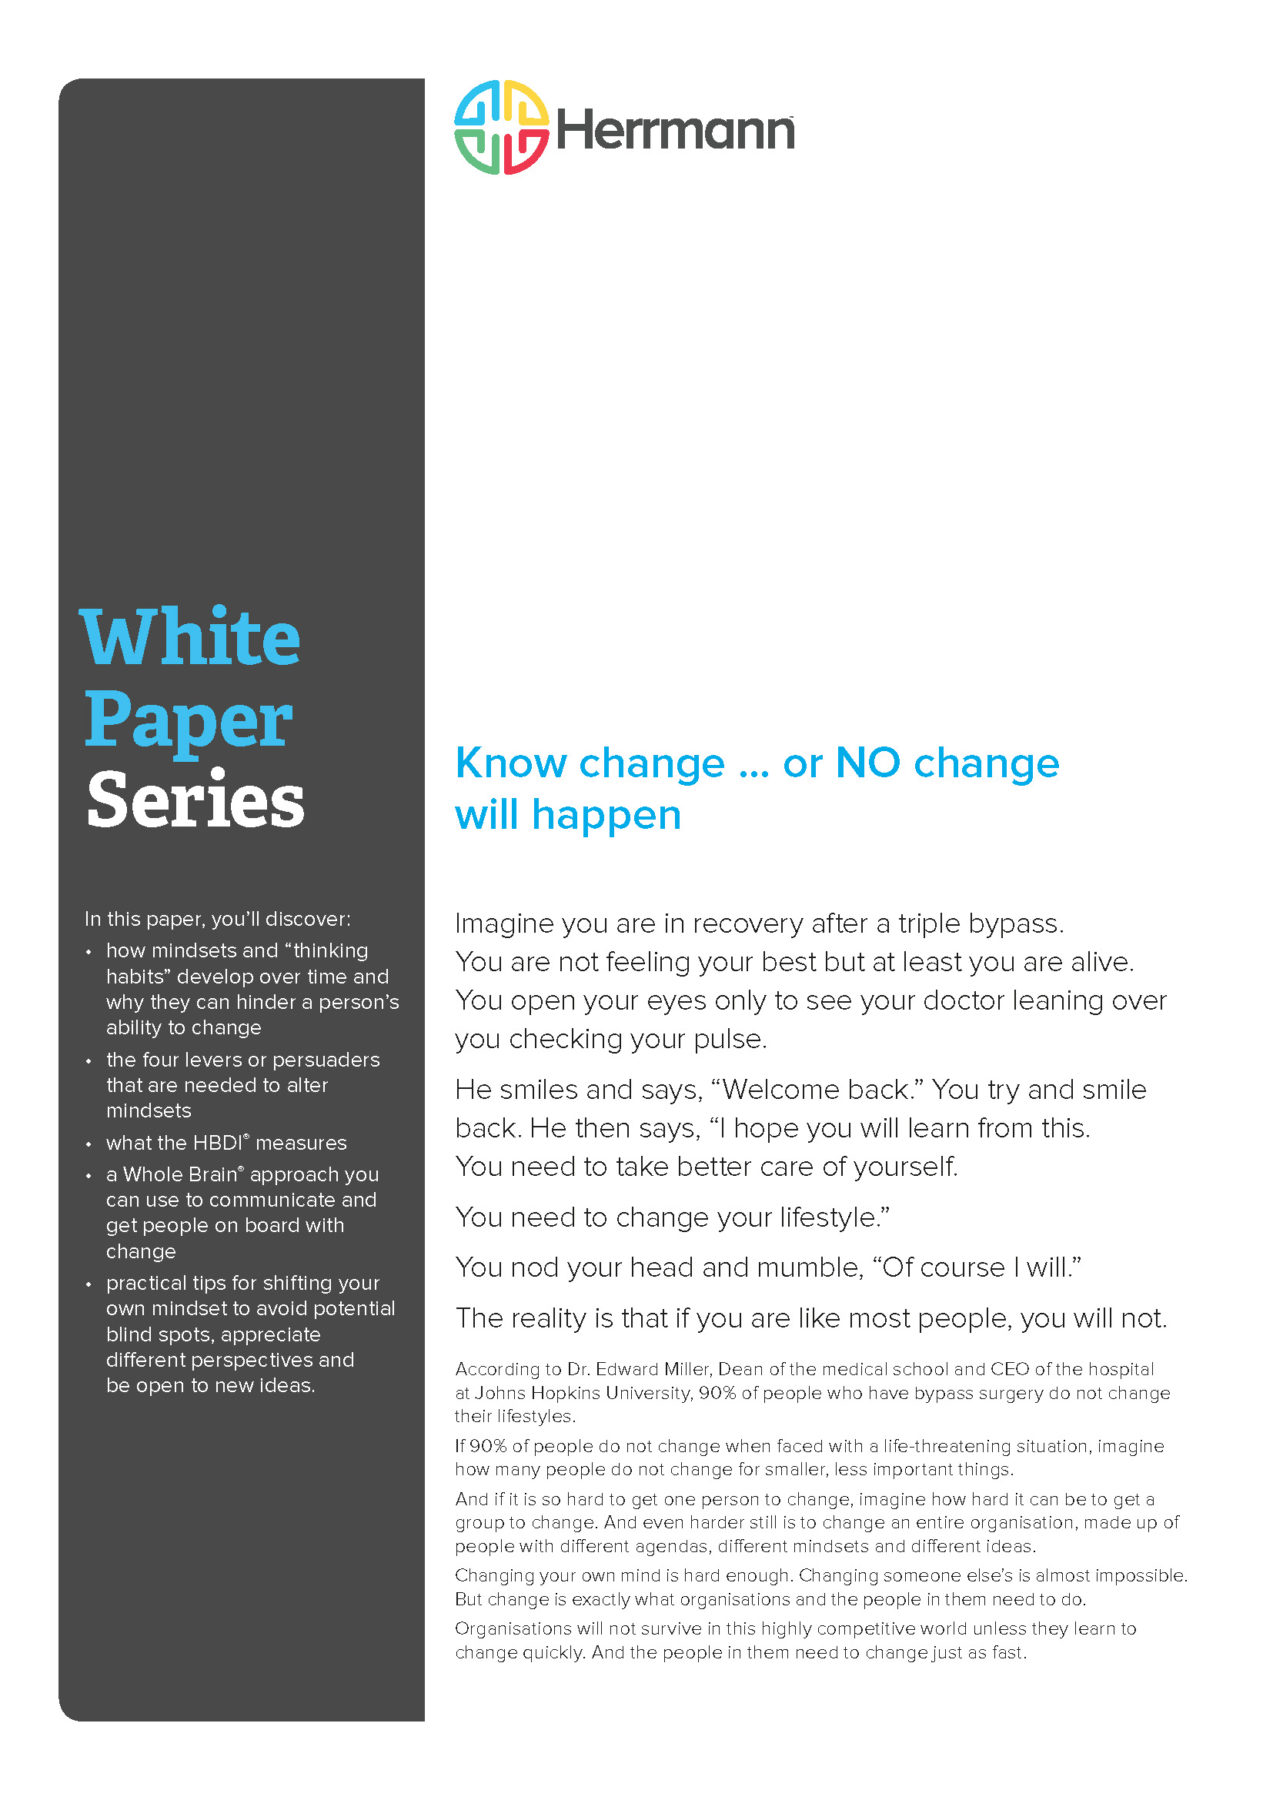 White Paper - Changing Minds